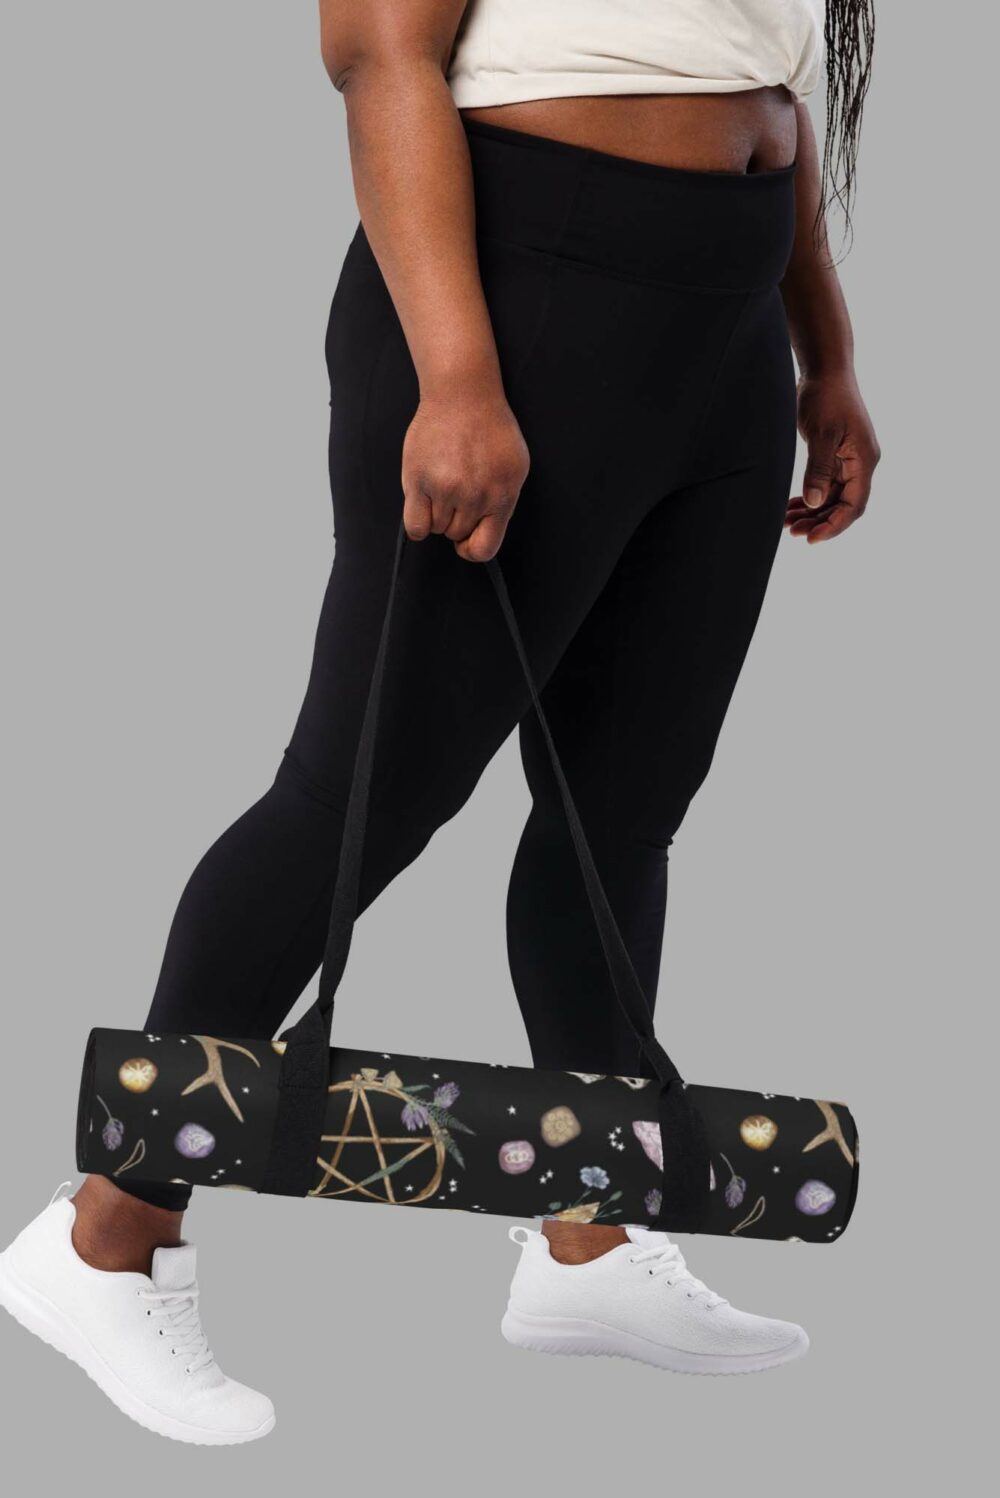 cosmic drifters earth witch yoga mat